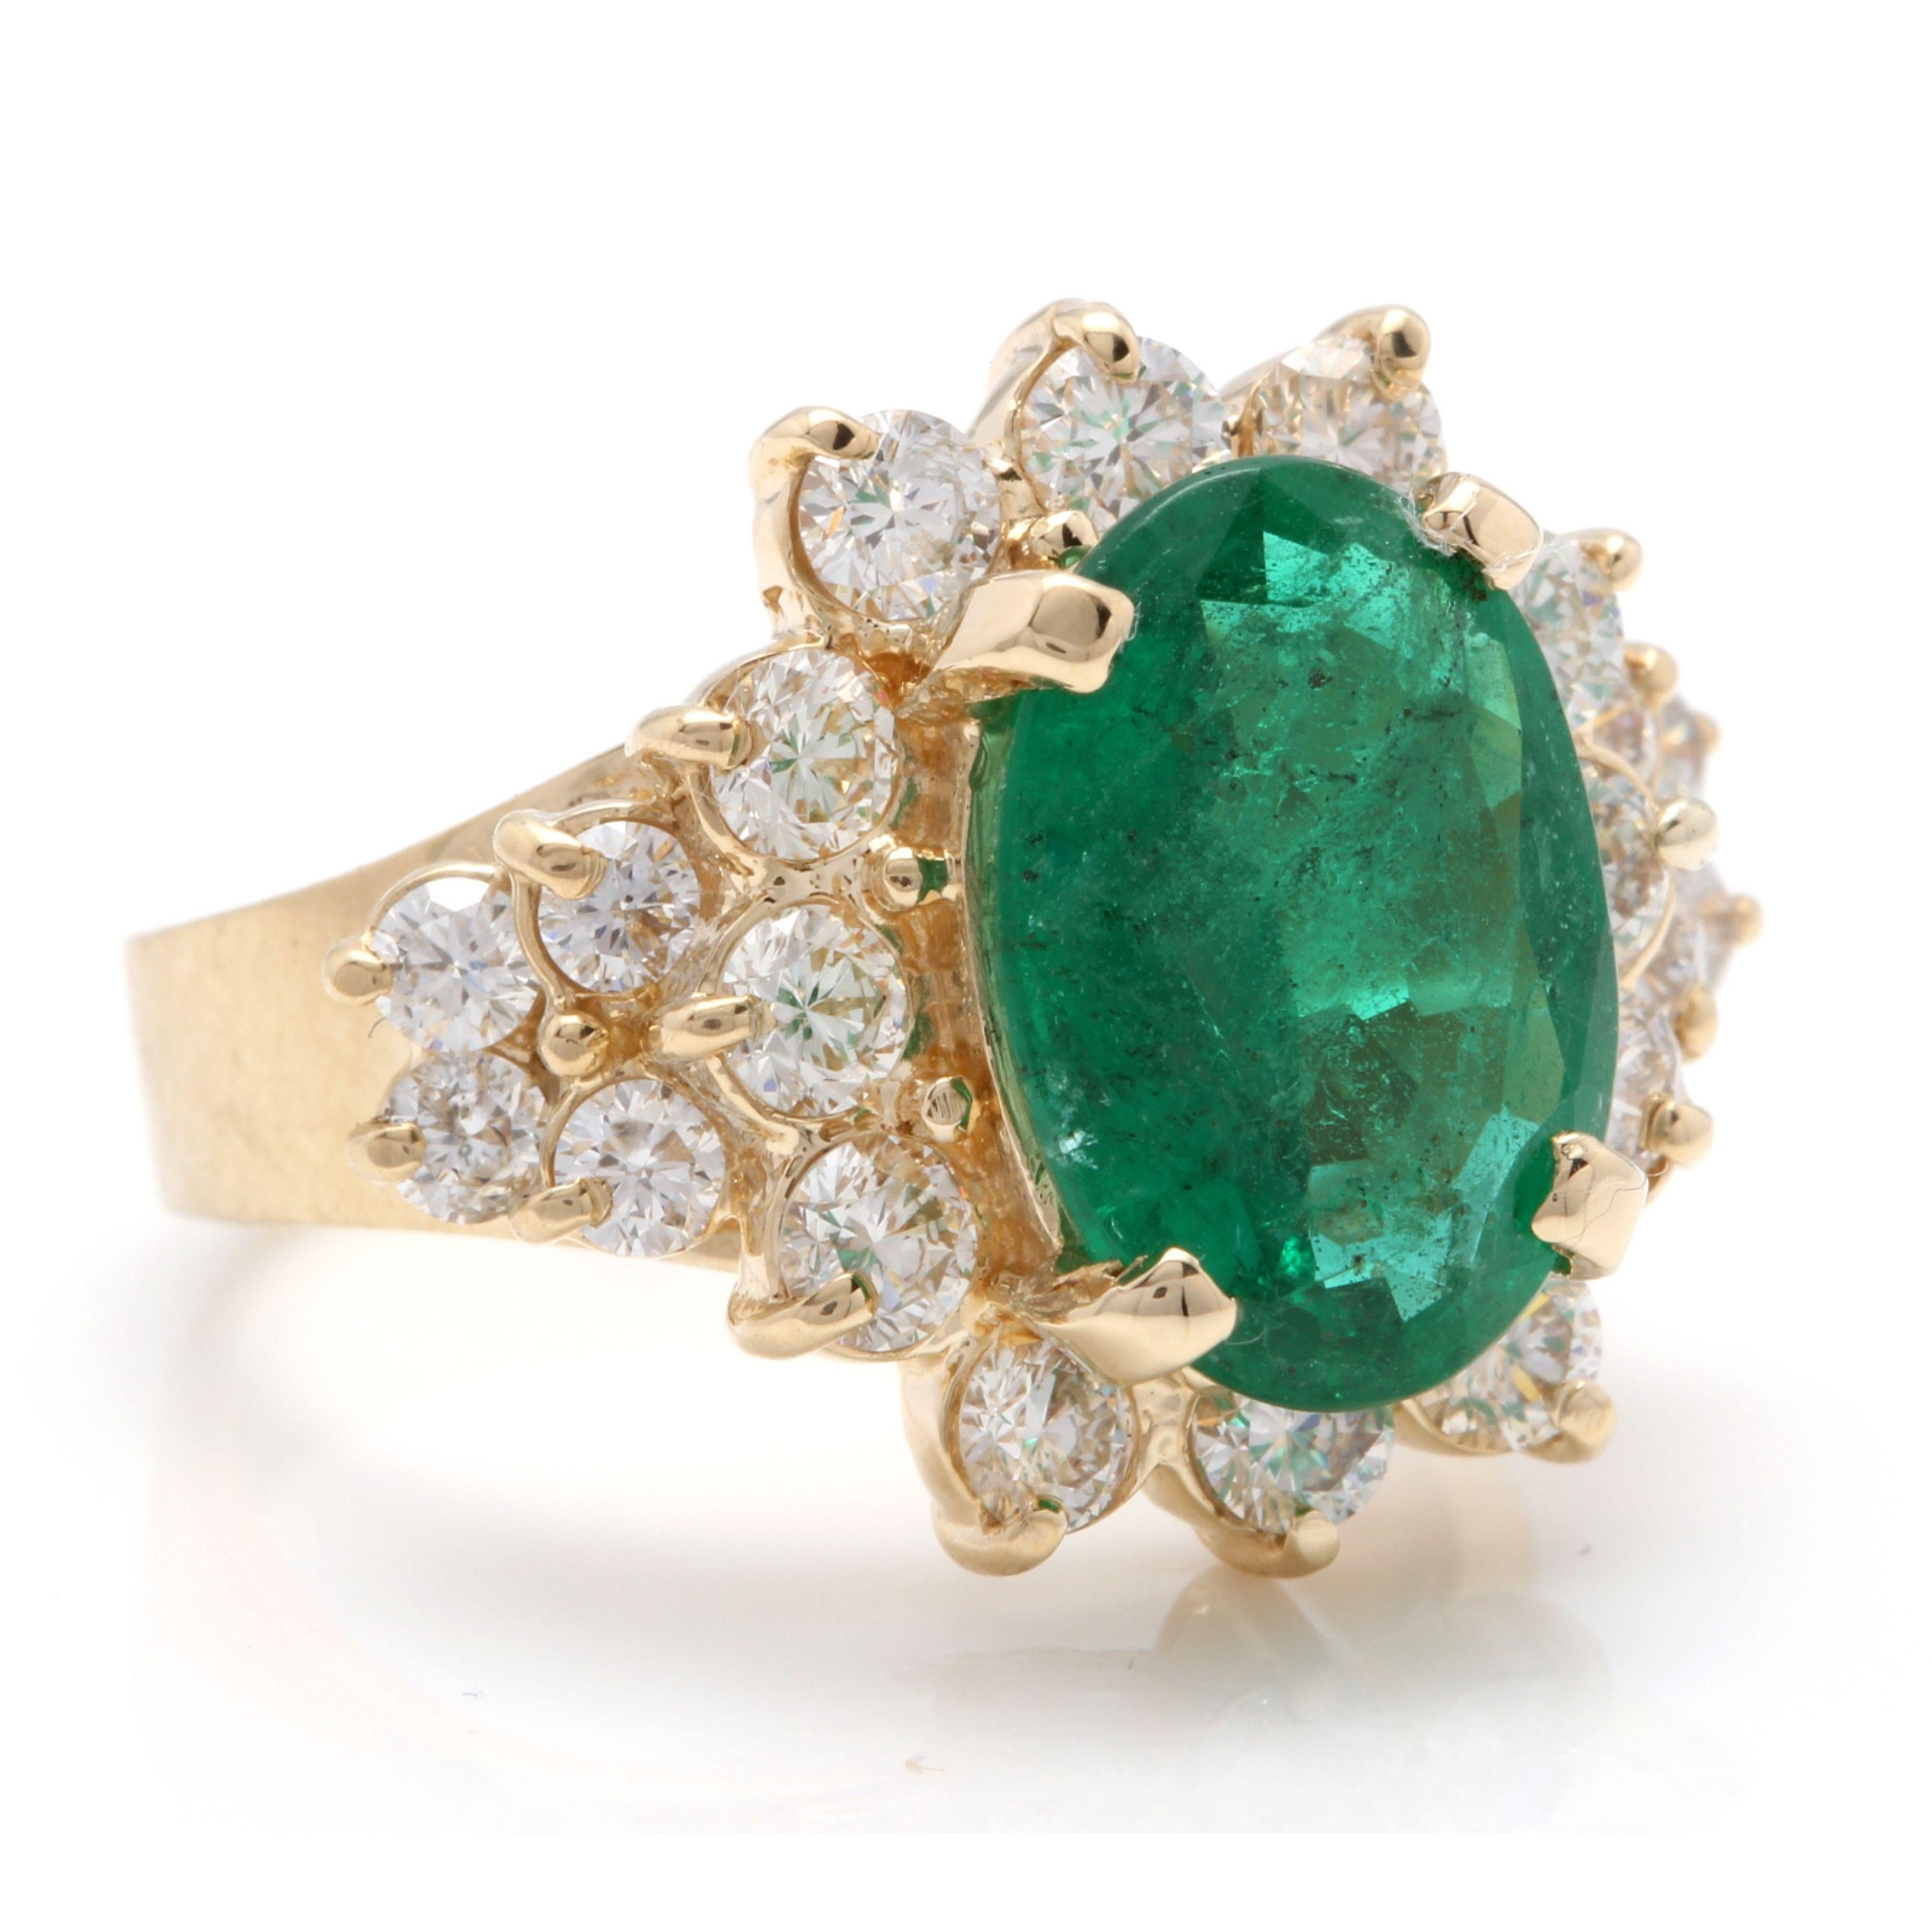 5.70 Carats Natural Emerald and Diamond 14K Solid Yellow Gold Ring

Total Natural Green Emerald Weight is: 4.00 Carats

Emerald Measures: 11.00 x 9.00mm

Natural Round Diamonds Weight: 1.70 Carats (color G-H / Clarity SI1-SI2)

Ring size: 7 (we